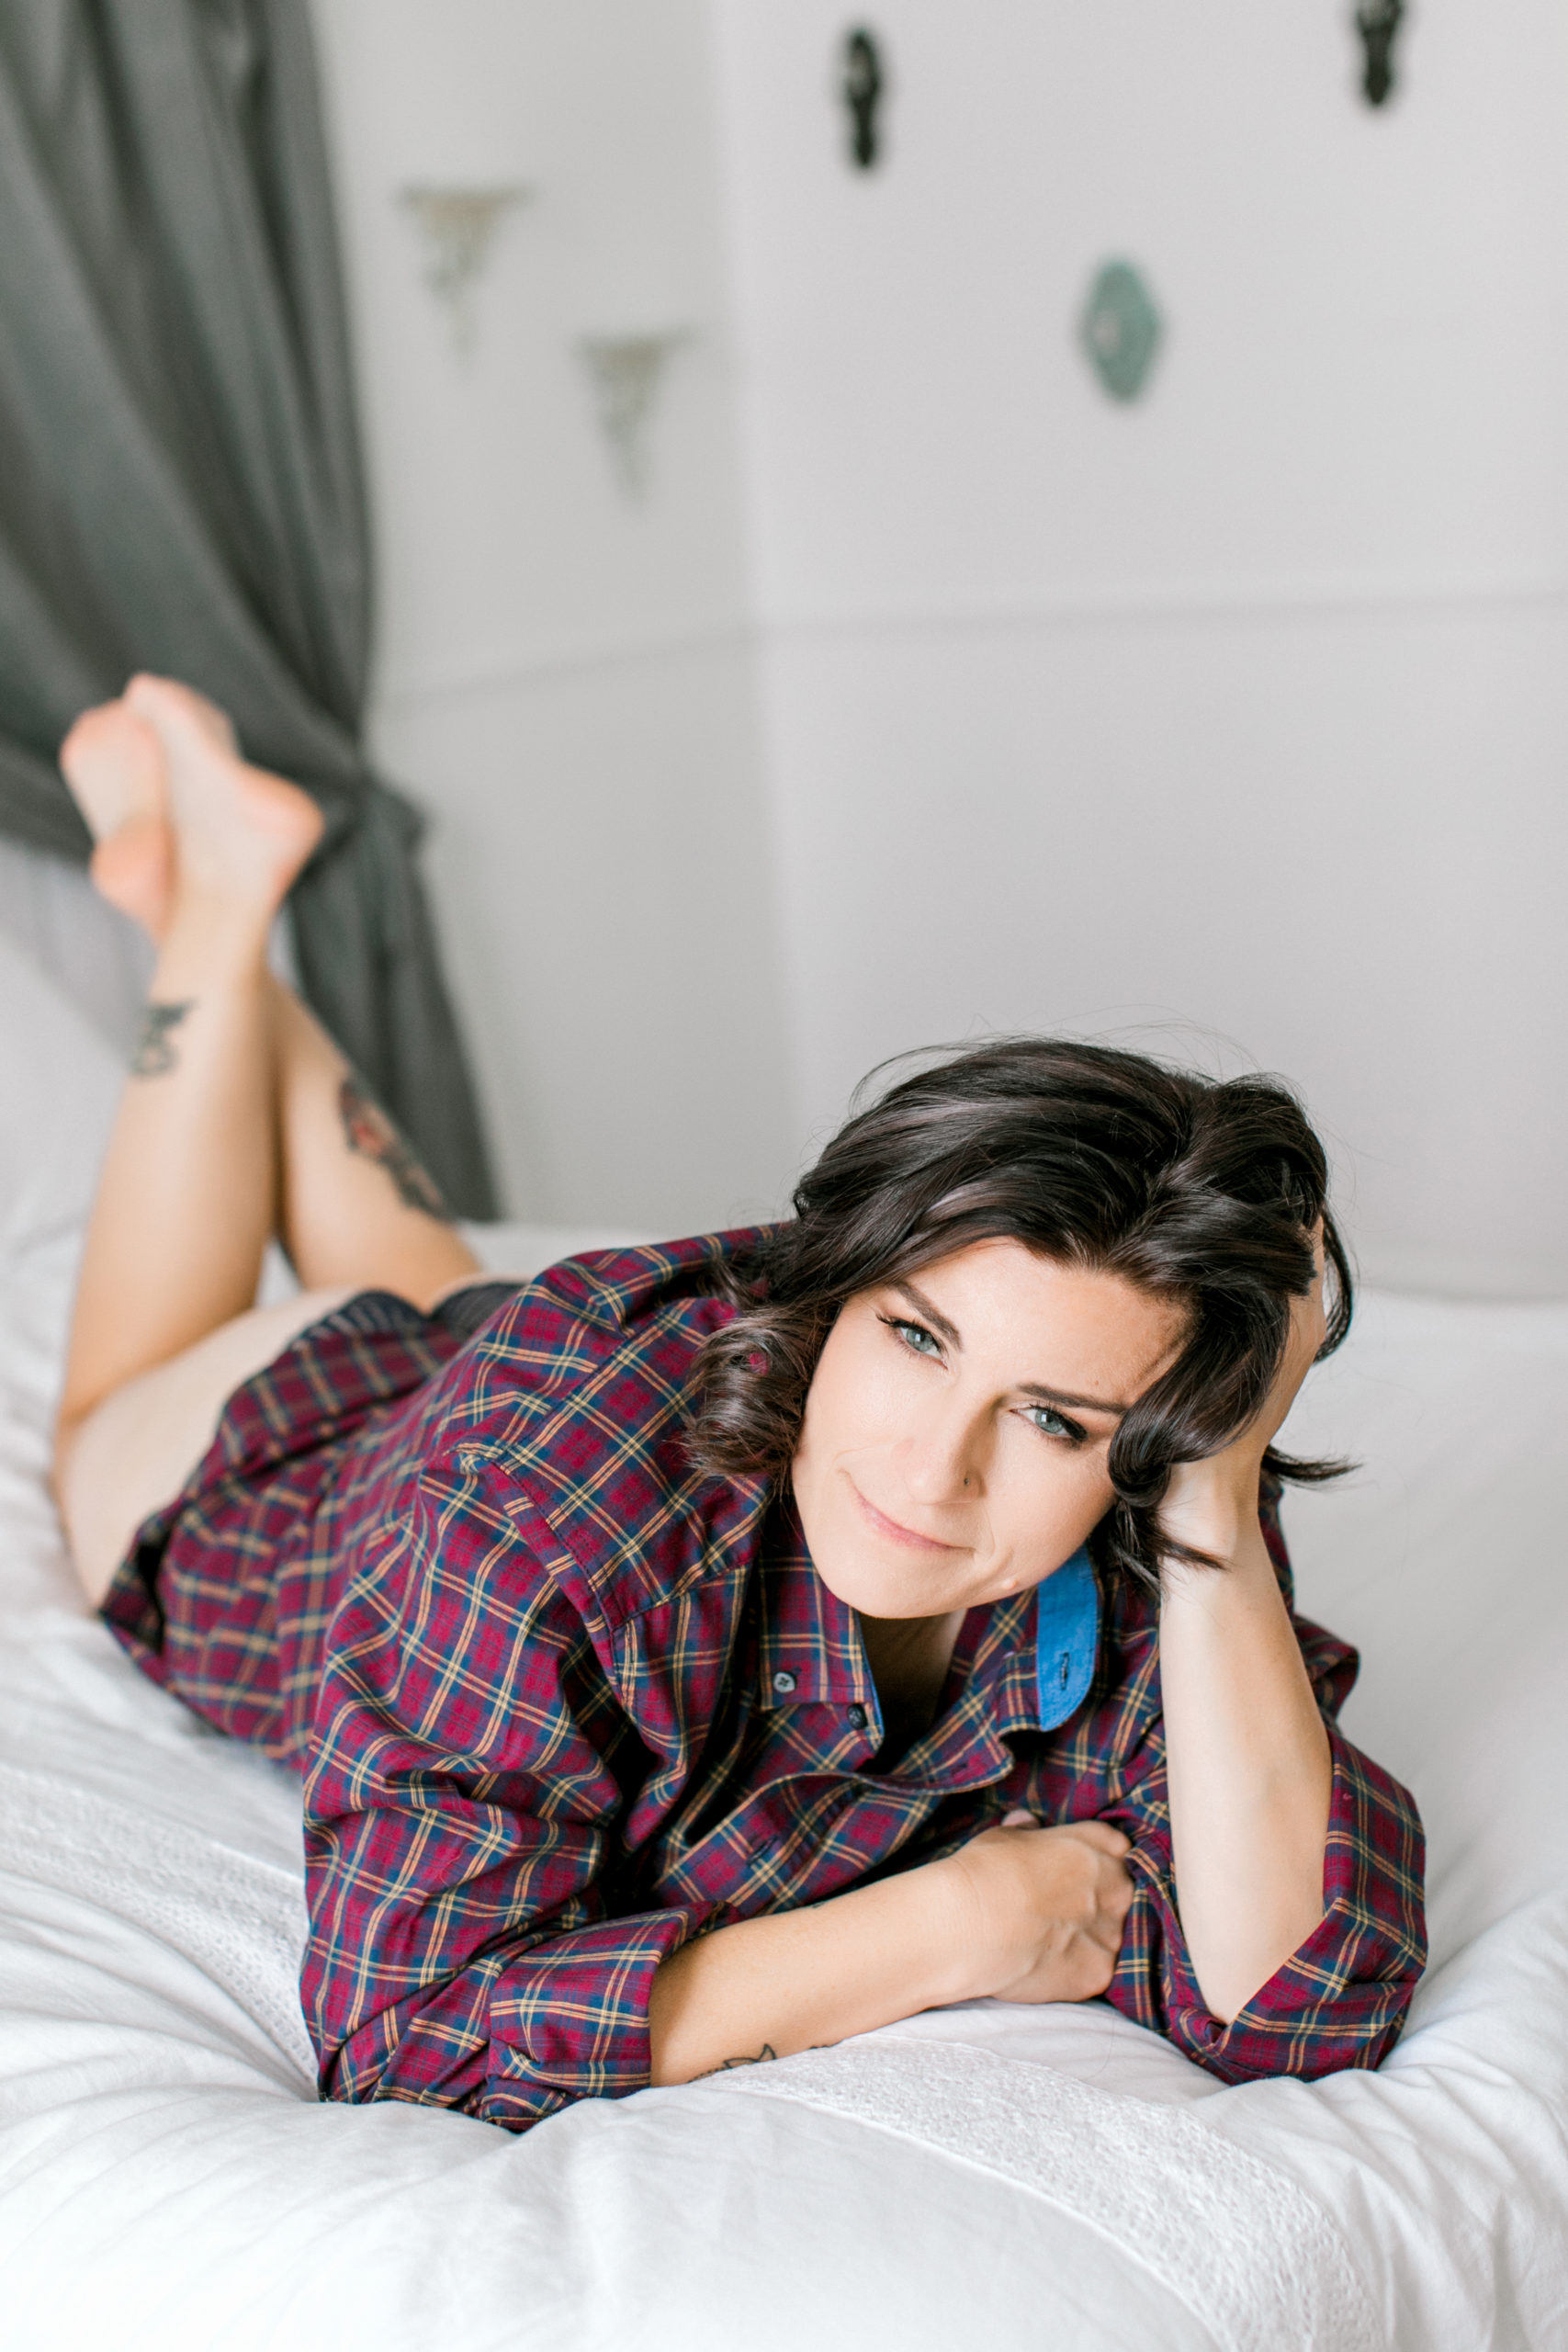 We are here to debunk five myths about boudoir photography! No it's not porn.. And yes, it's about celebrating what makes you beautiful and comfortable. Like this comfortable and sexy look wearing just his button down shirt. 